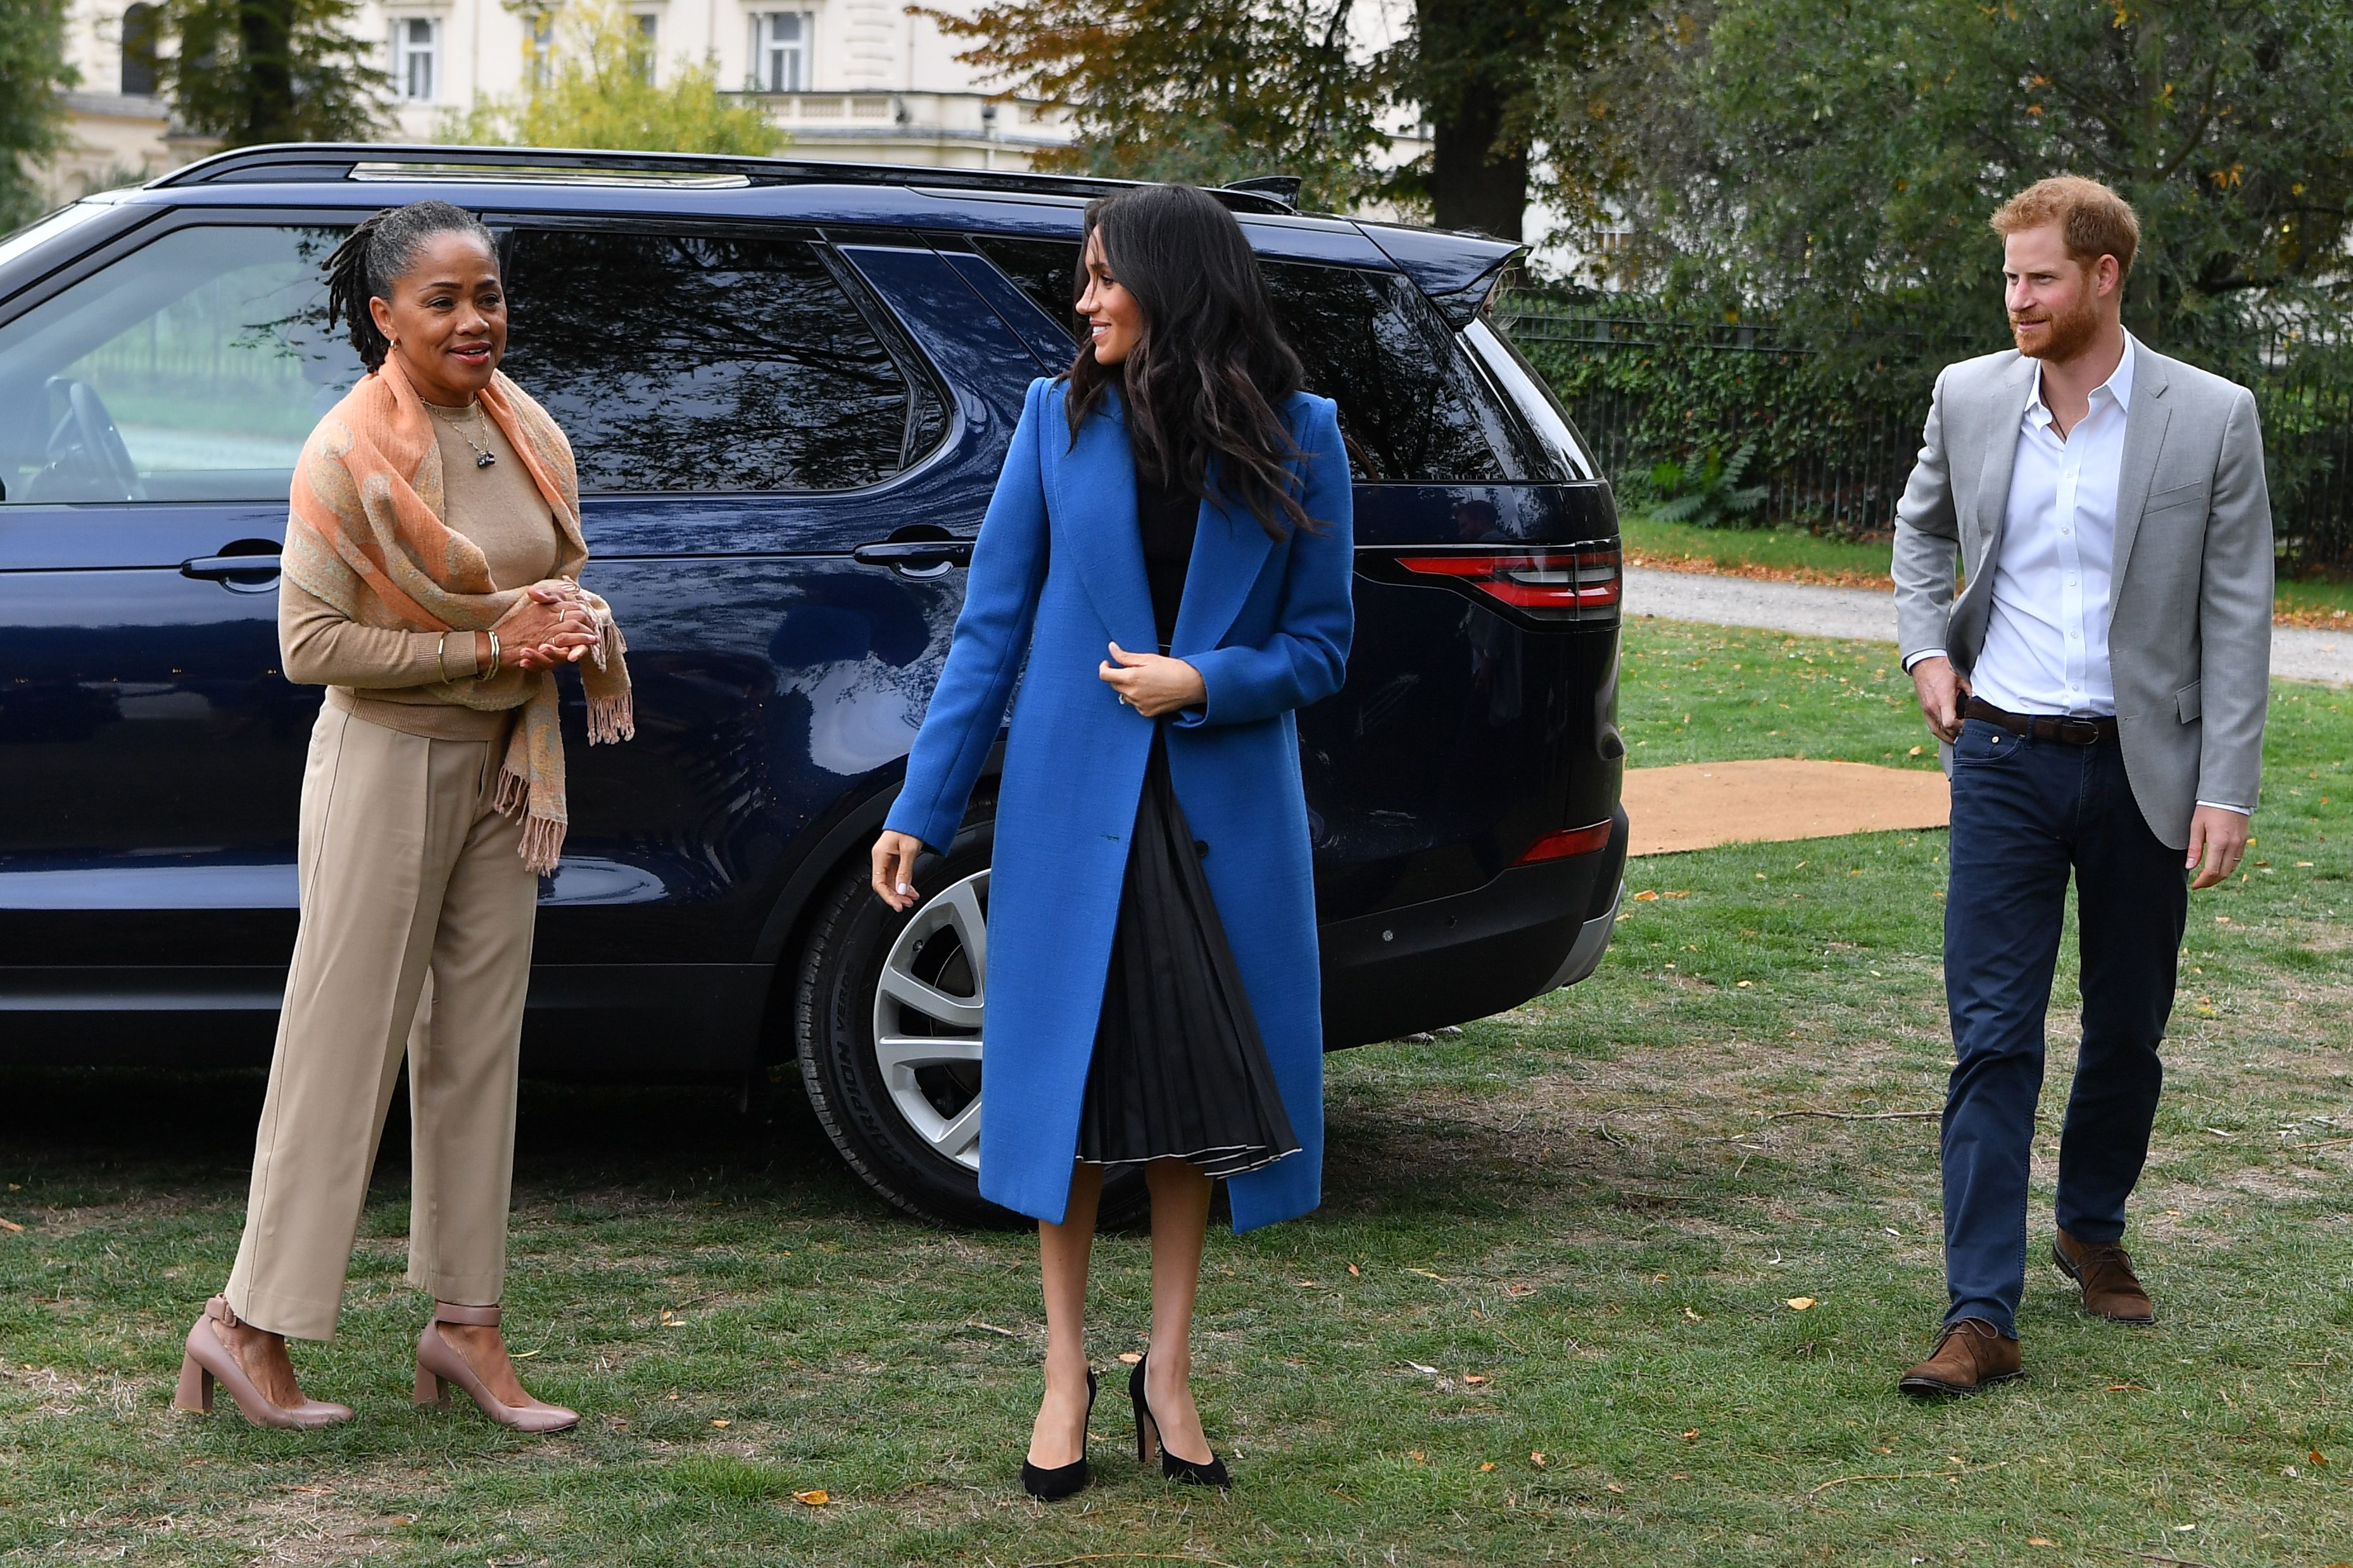 Doria Ragland, Duchess Meghan, and Prince Harry at an event to mark the launch of a cookbook with recipes at Kensington Palace in London on September 20, 2018. | Source: Ben Stansall/AFP/Getty Images